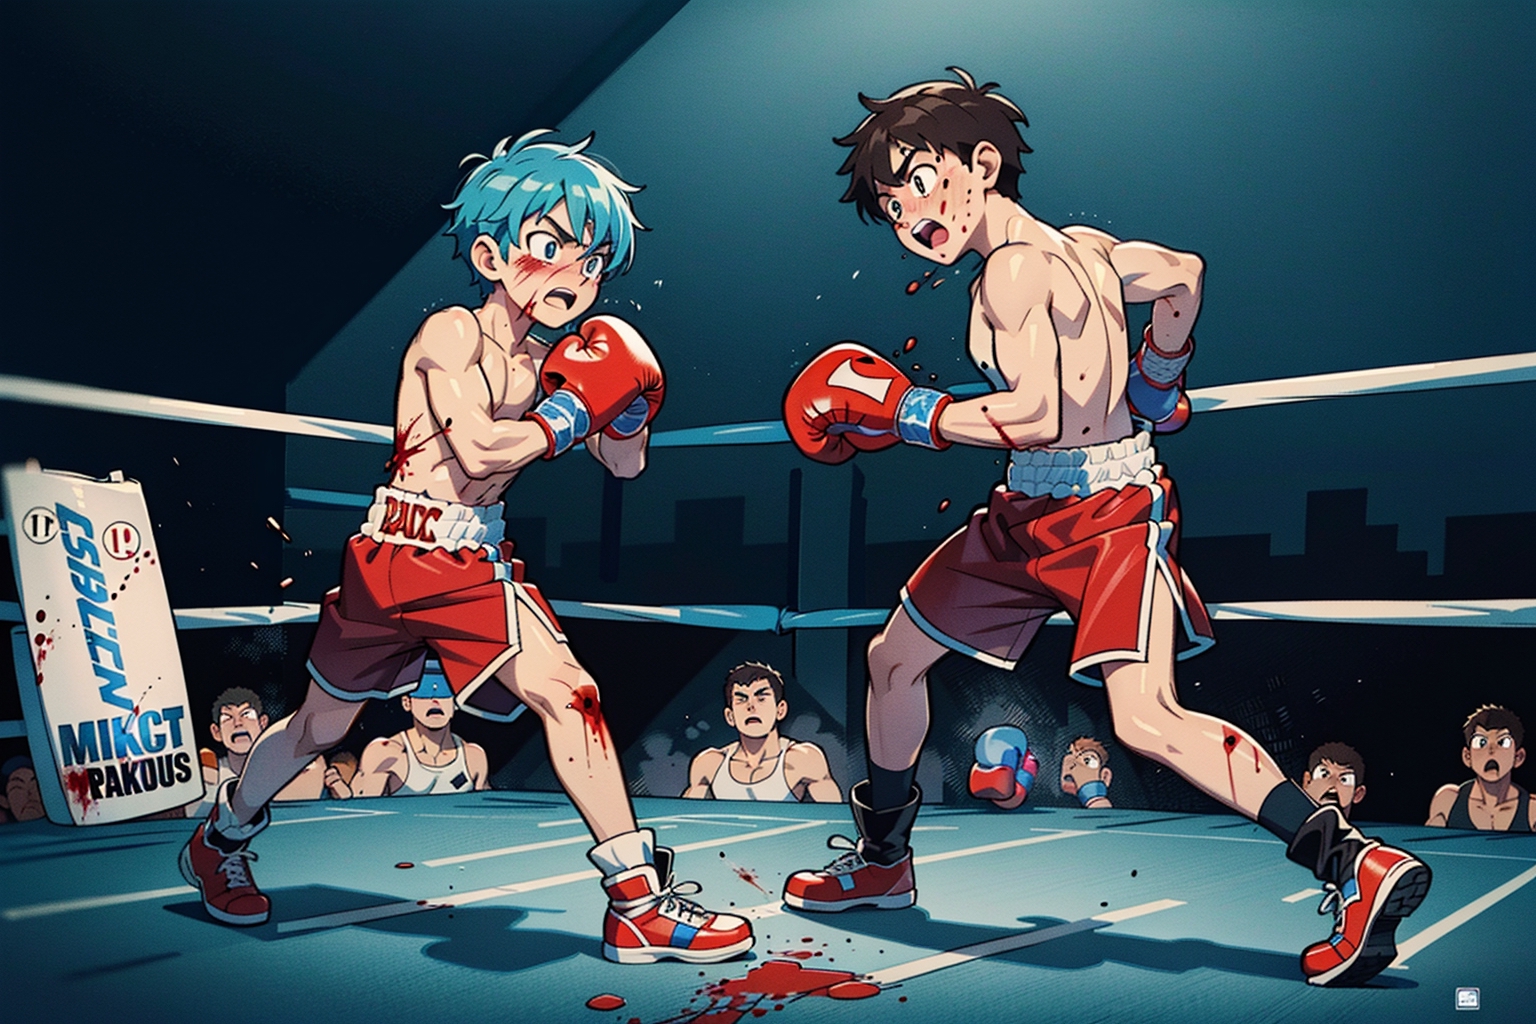 Two boys boxing match anime style